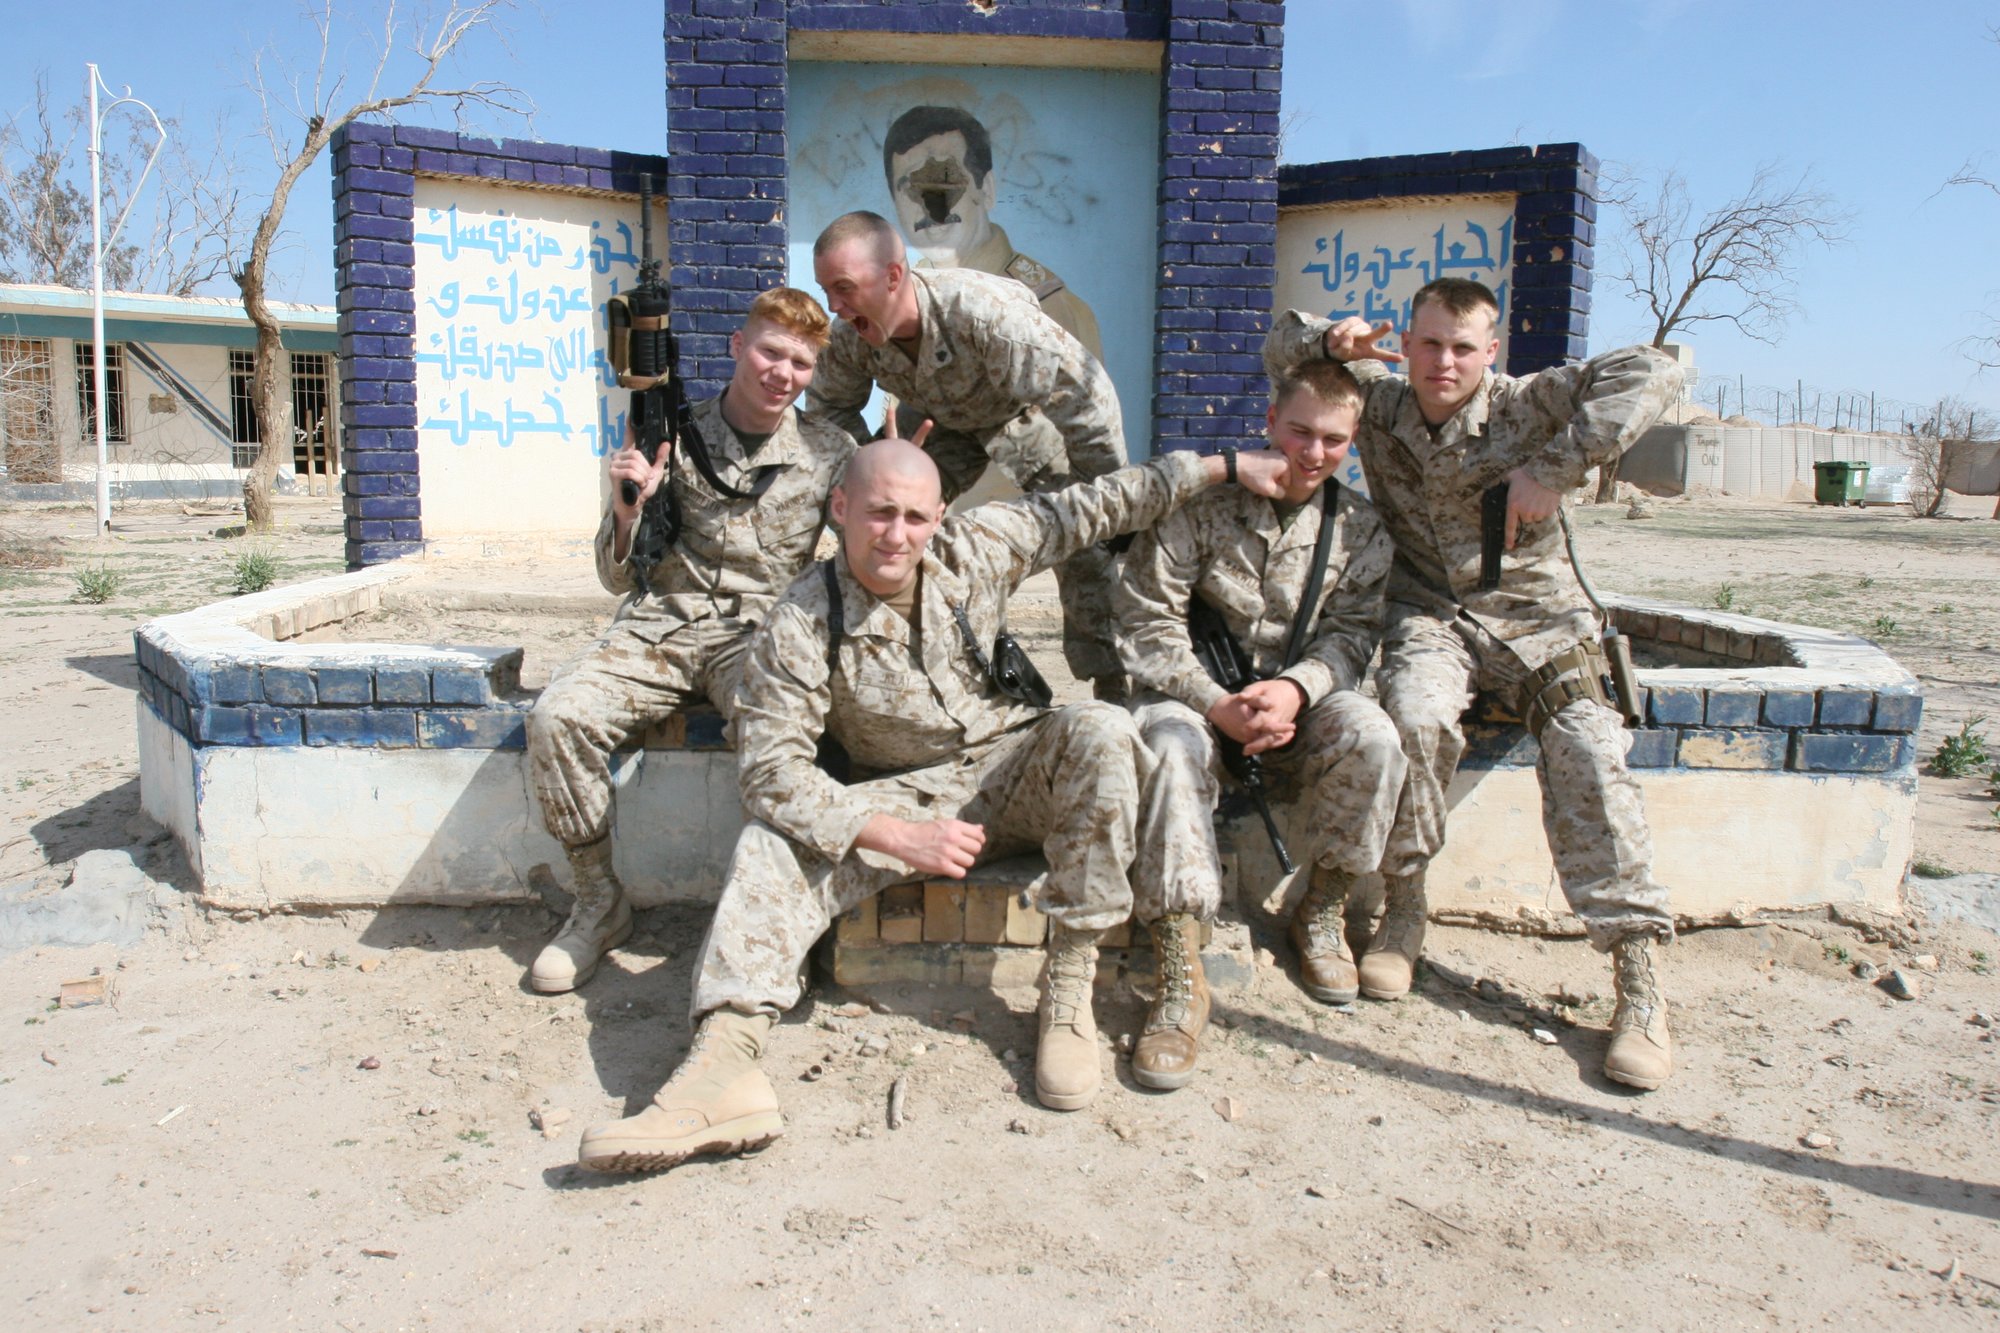 Phil Klay, at front, describes having the opportunity to mentor subordinate Marines in journalism as one of the best aspects of serving overseas. Photo courtesy of Phil Klay.